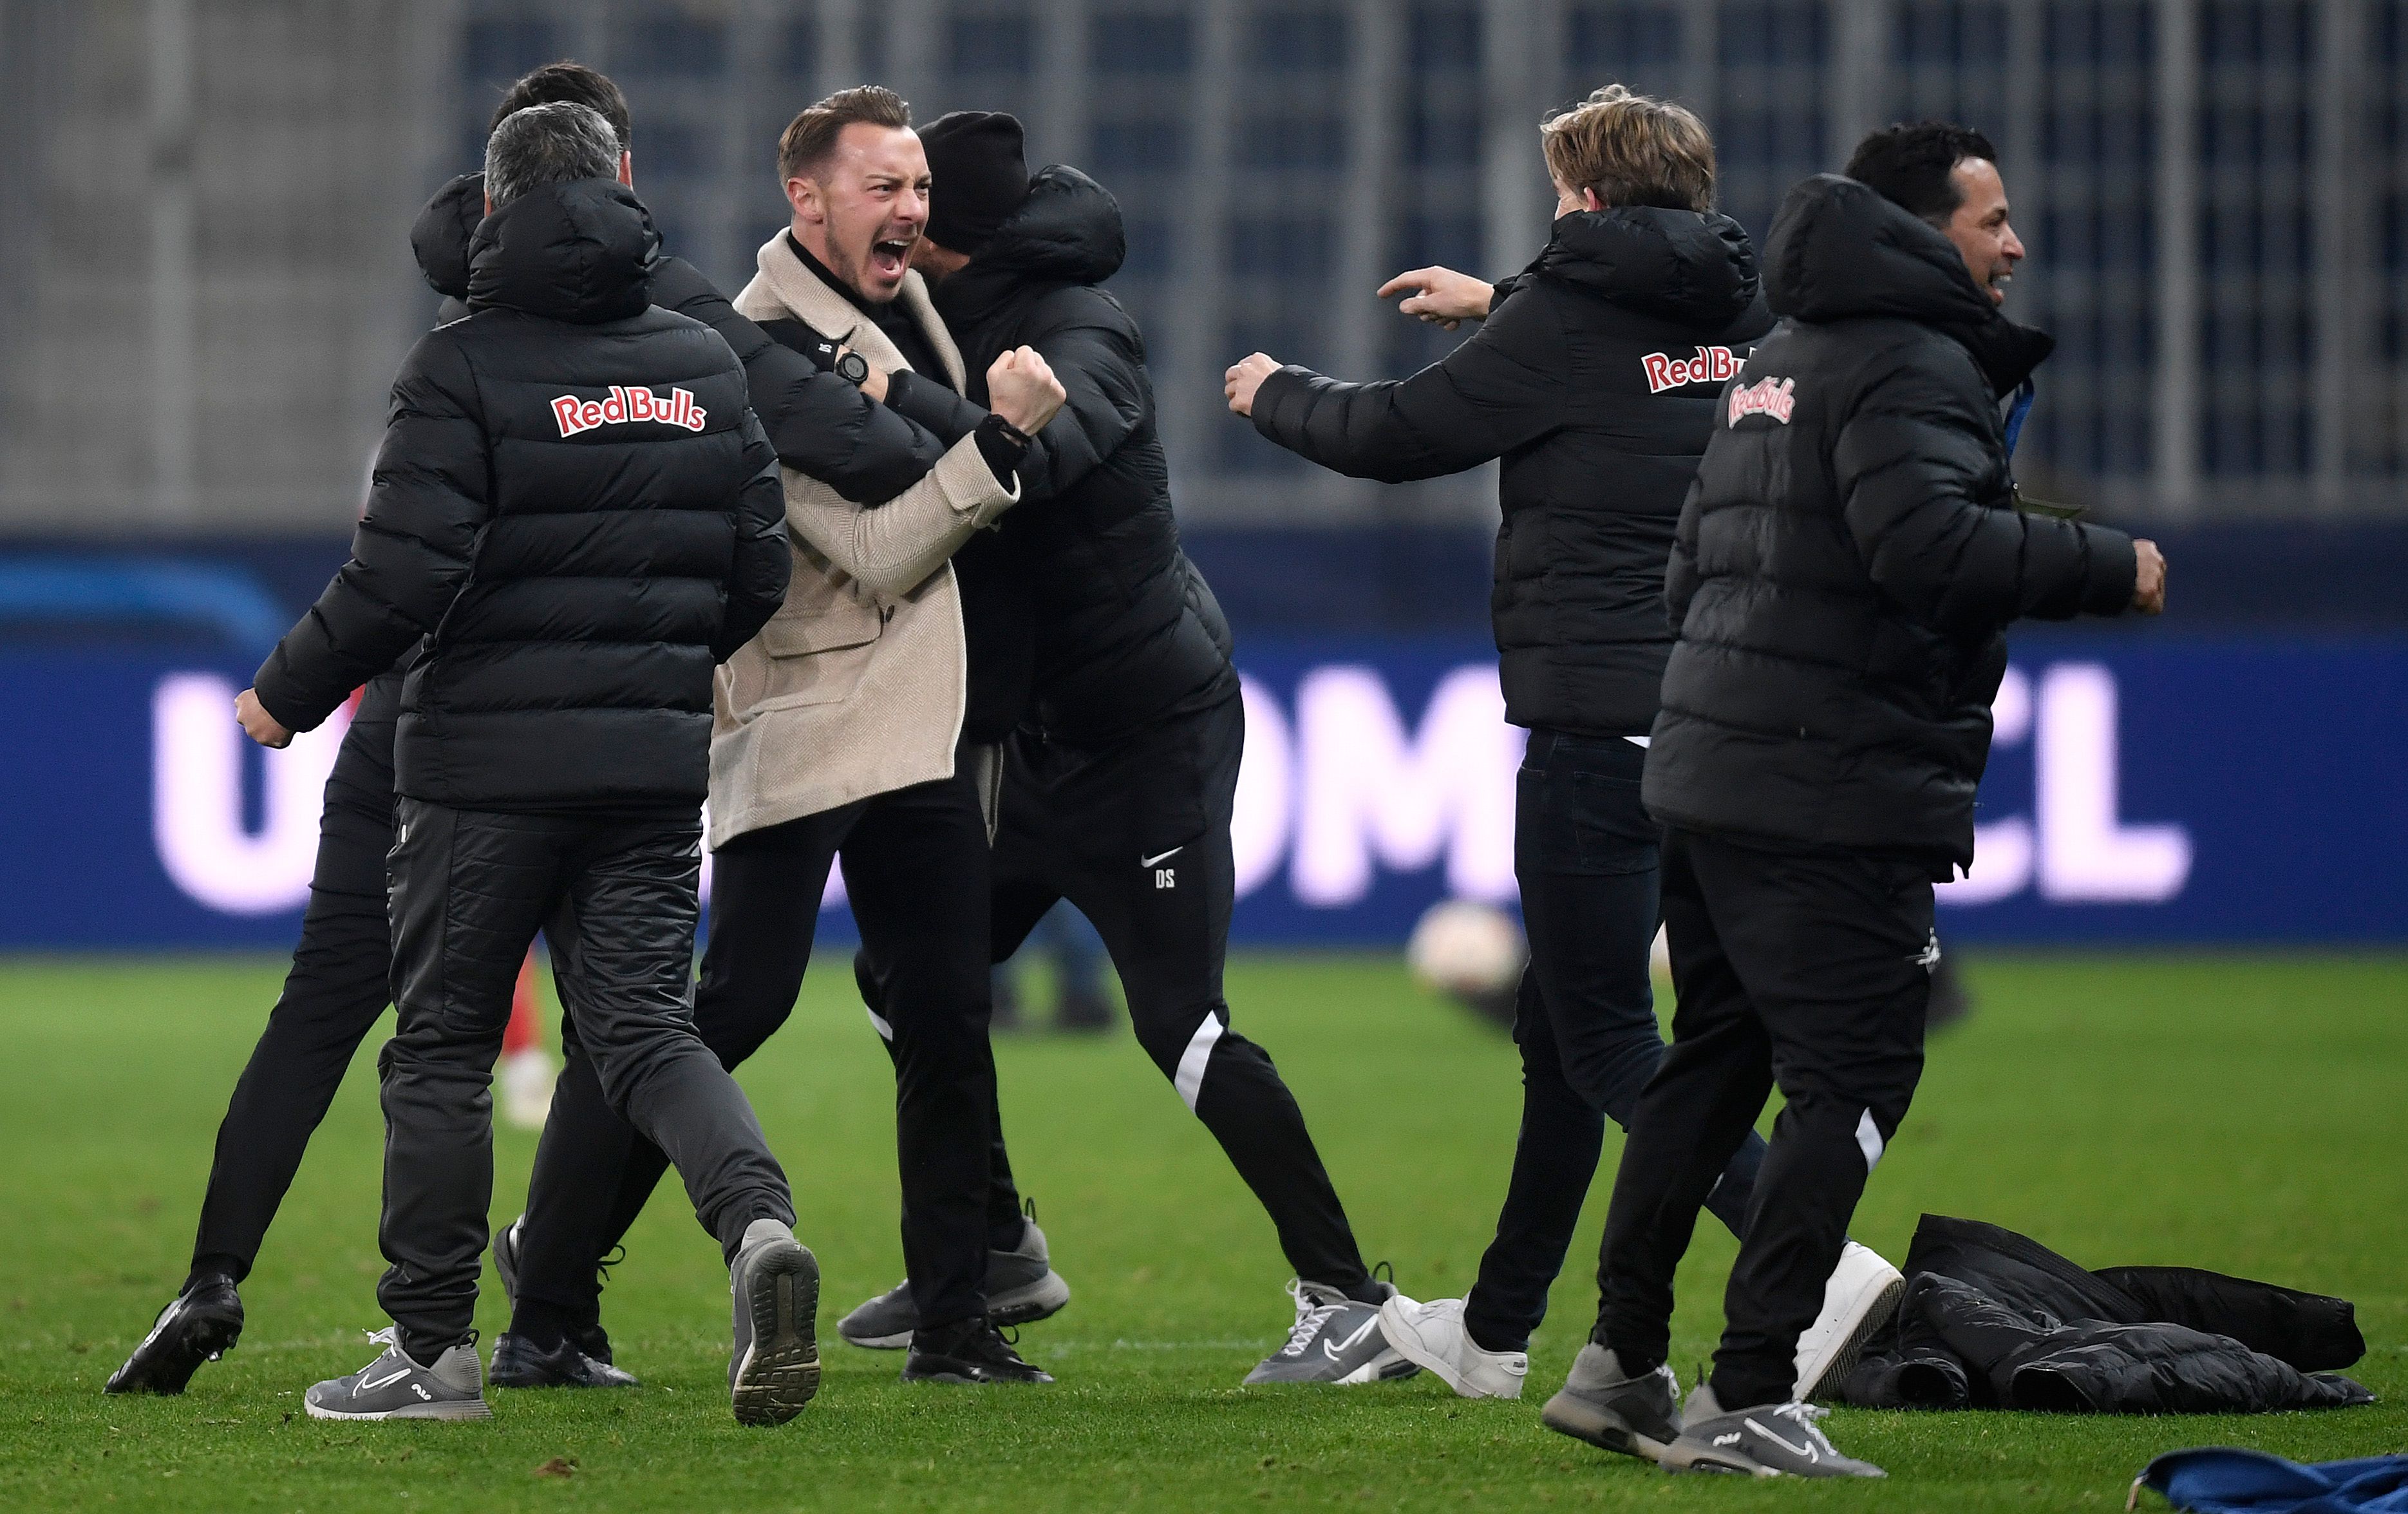 Matthias Jaissle, Head Coach of Red Bull Salzburg celebrates with the backroom staff after victory in the UEFA Champions League 